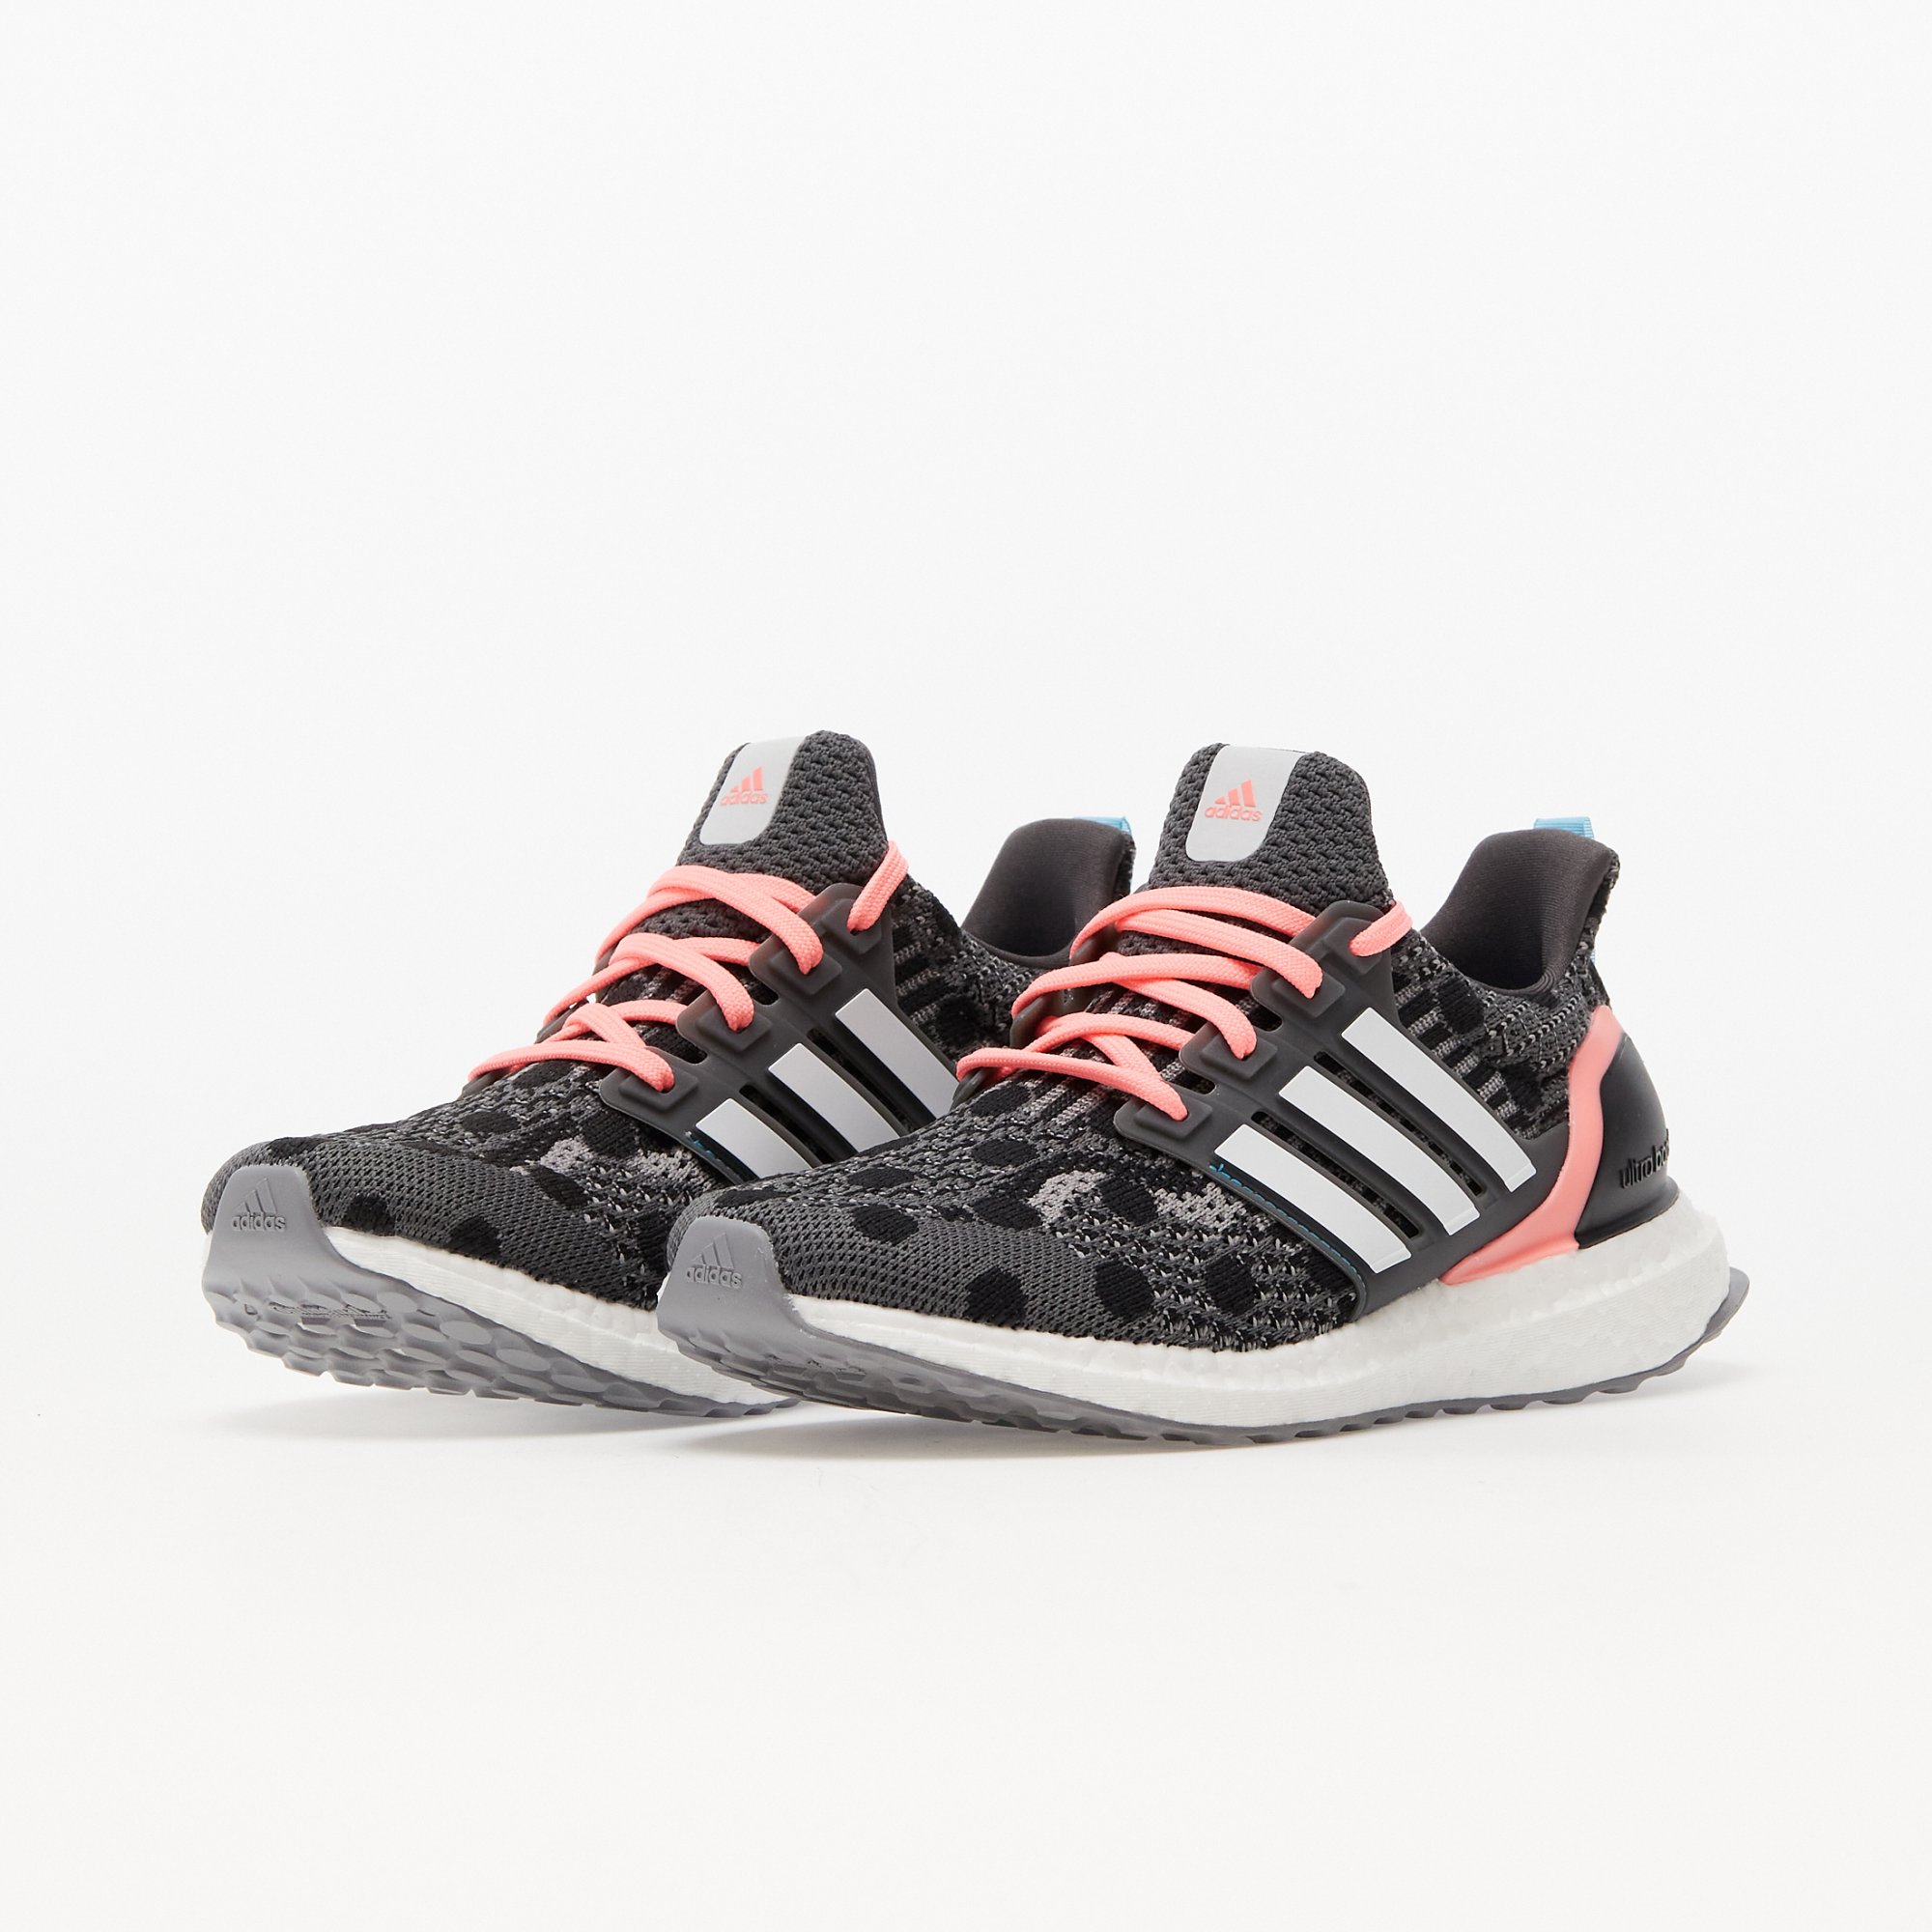 adidas Performance Ultraboost 5.0 DNA grey five/cloud white/acid red adidas Performance